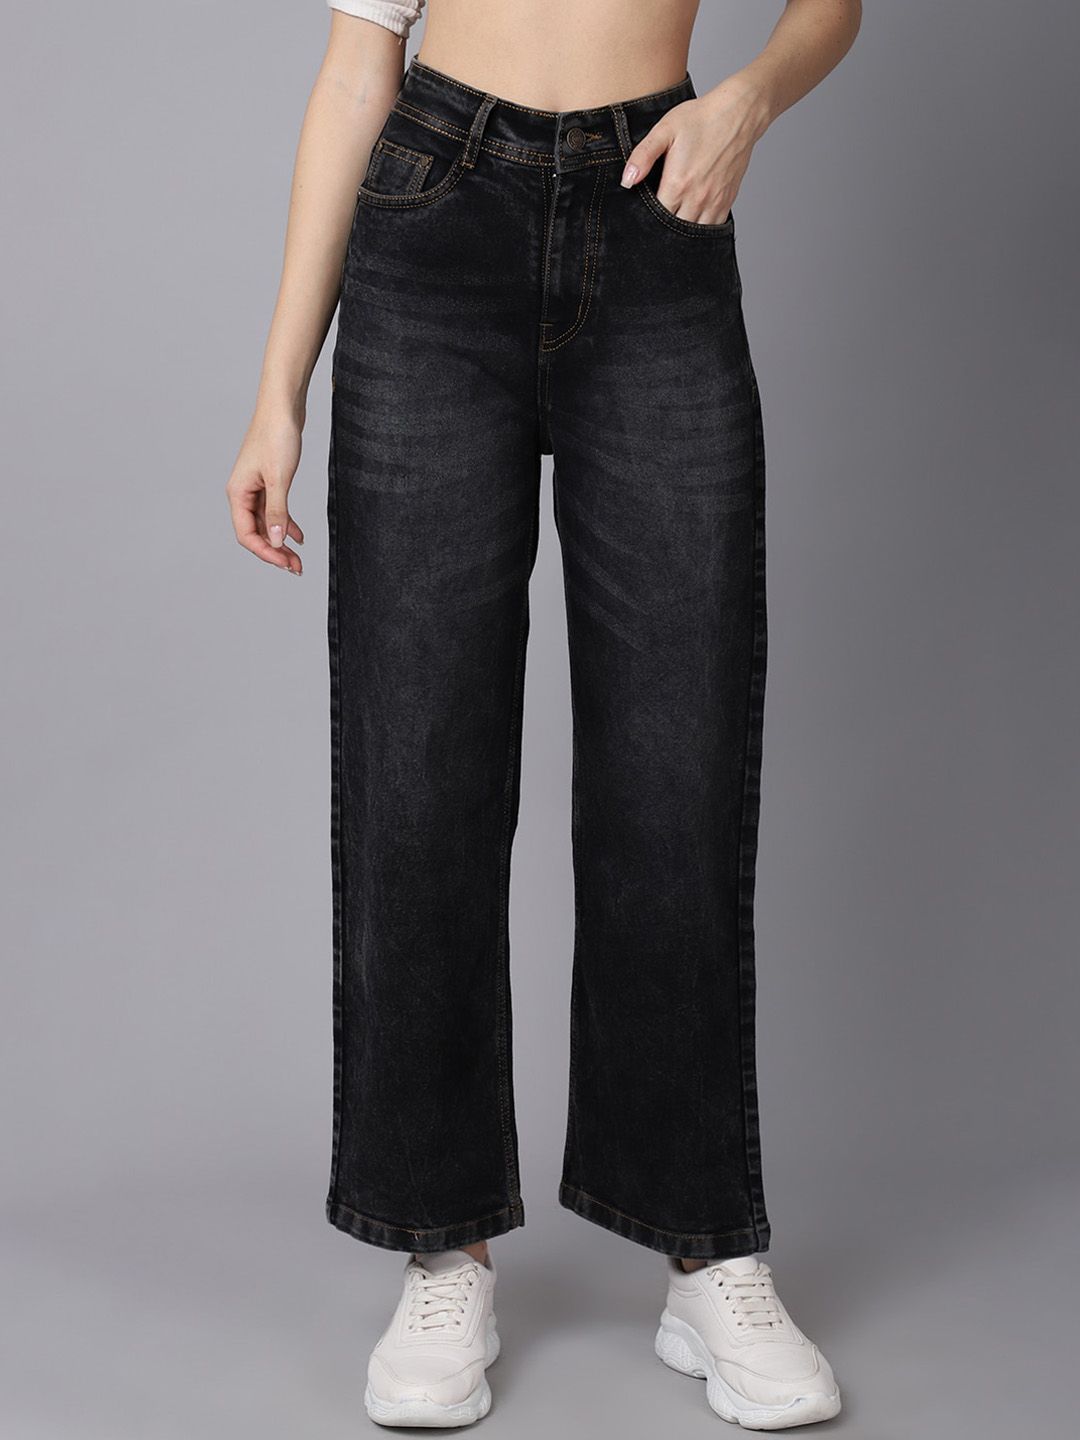 River Of Design Jeans Women Charcoal Wide Leg High-Rise Highly Distressed Heavy Fade Jeans Price in India